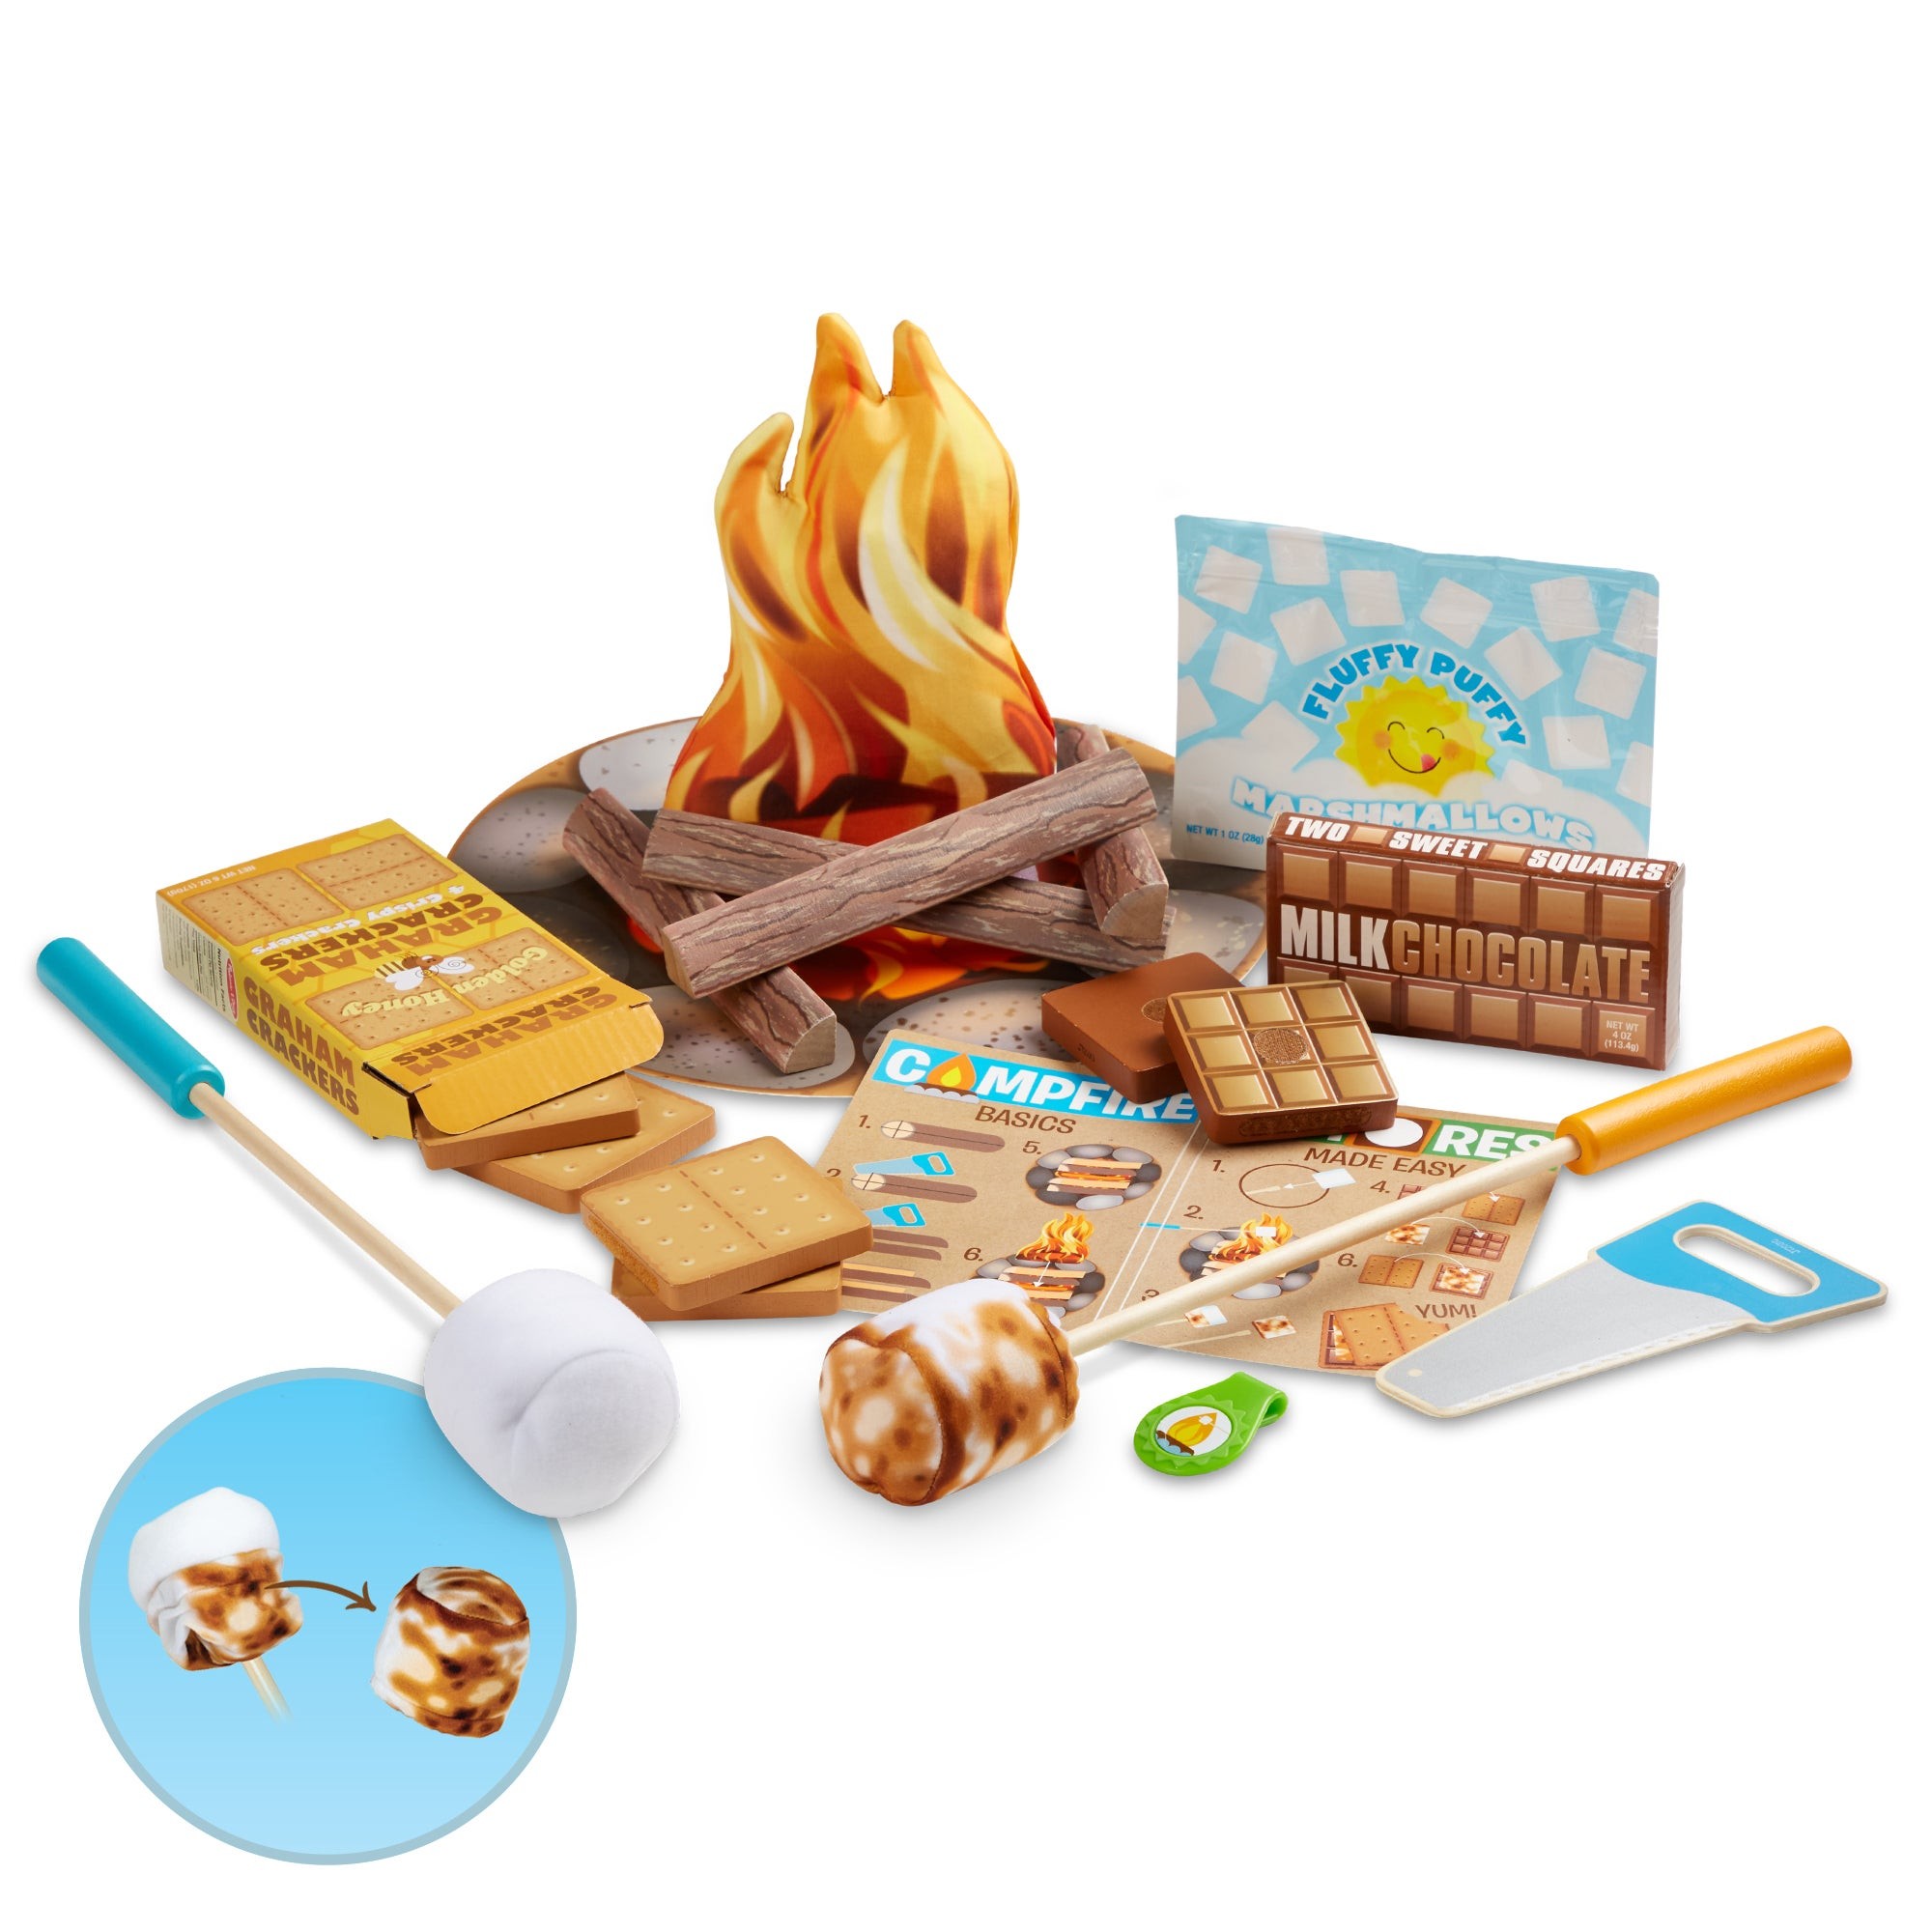 Let's Explore Campfire S'mores Playset, Ages 3+ Years